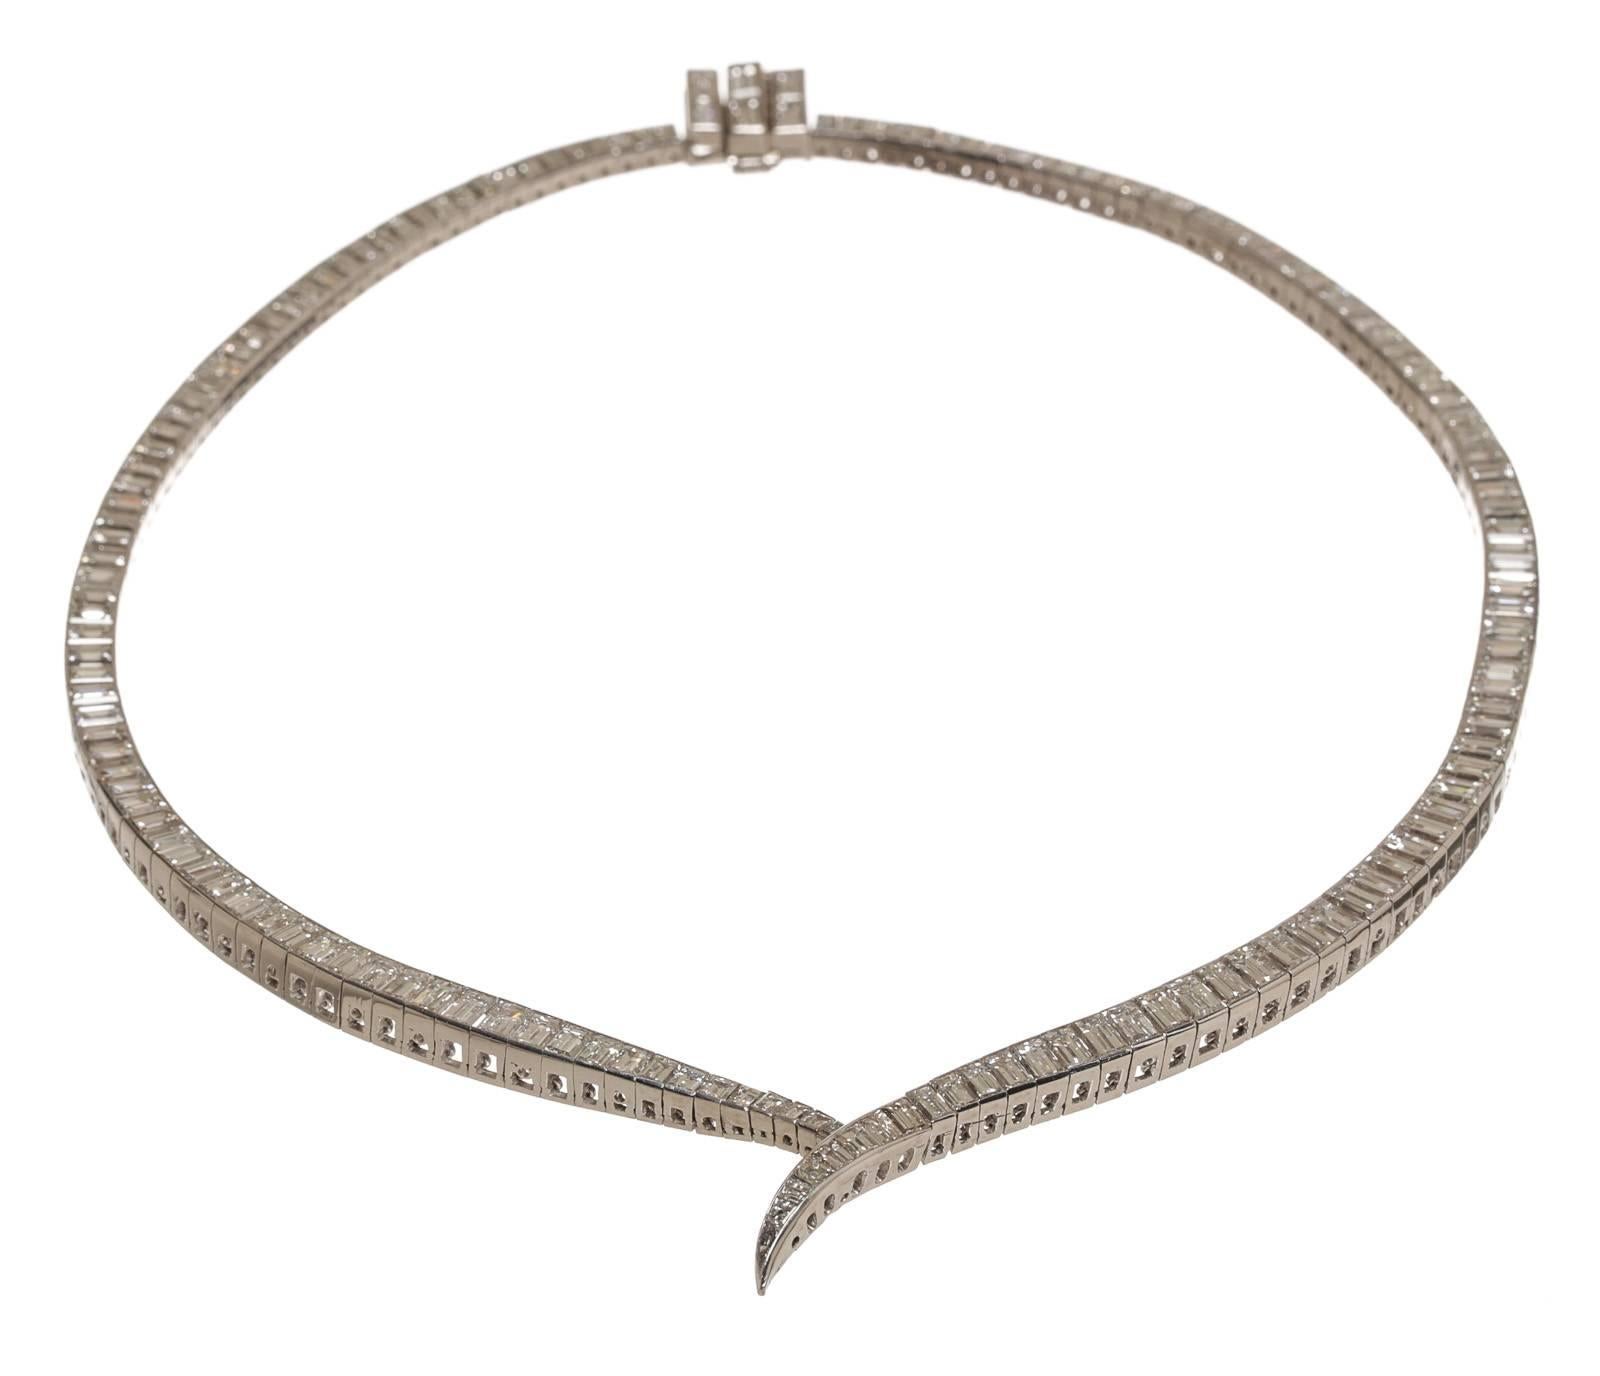 Featured here is this beautiful platinum and diamond necklace. This necklace weighs approximately 56.1 grams and is cast manufactured of traditional design and bright finish. It measures 14.5 inches x 4.mm. Channel set are 158 straight baguette